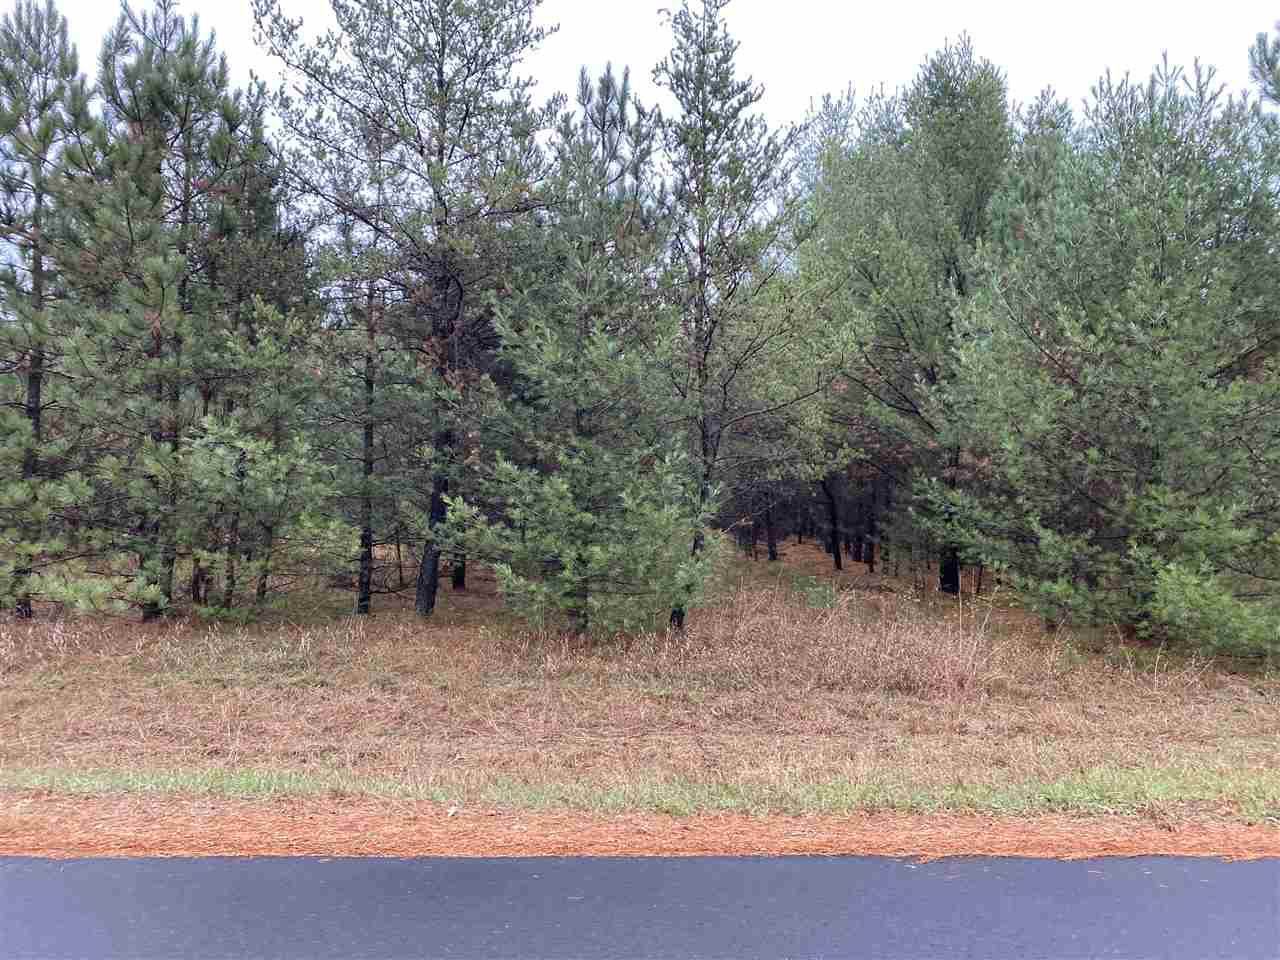 8.07 Acres 48TH STREET SOUTH #Lot 4 of WCCSM 10787, Lot 4 of WCCSM 10787, Wisconsin Rapids, WI 54494